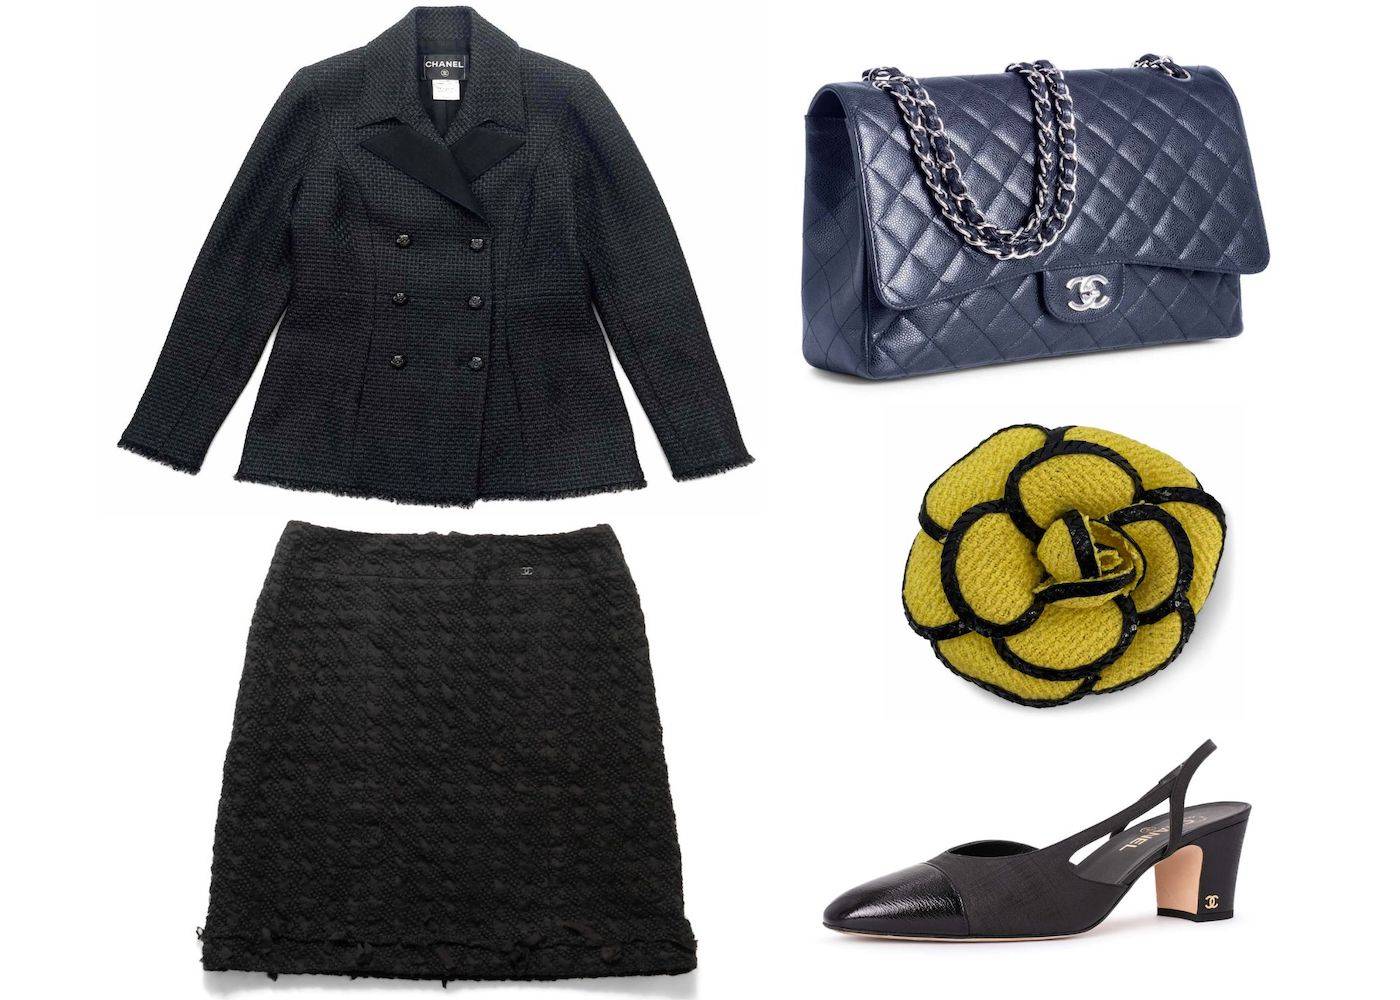 Chanel Items Representing Slow Fashion in a Capsule Wardrobe by CODOGIRL